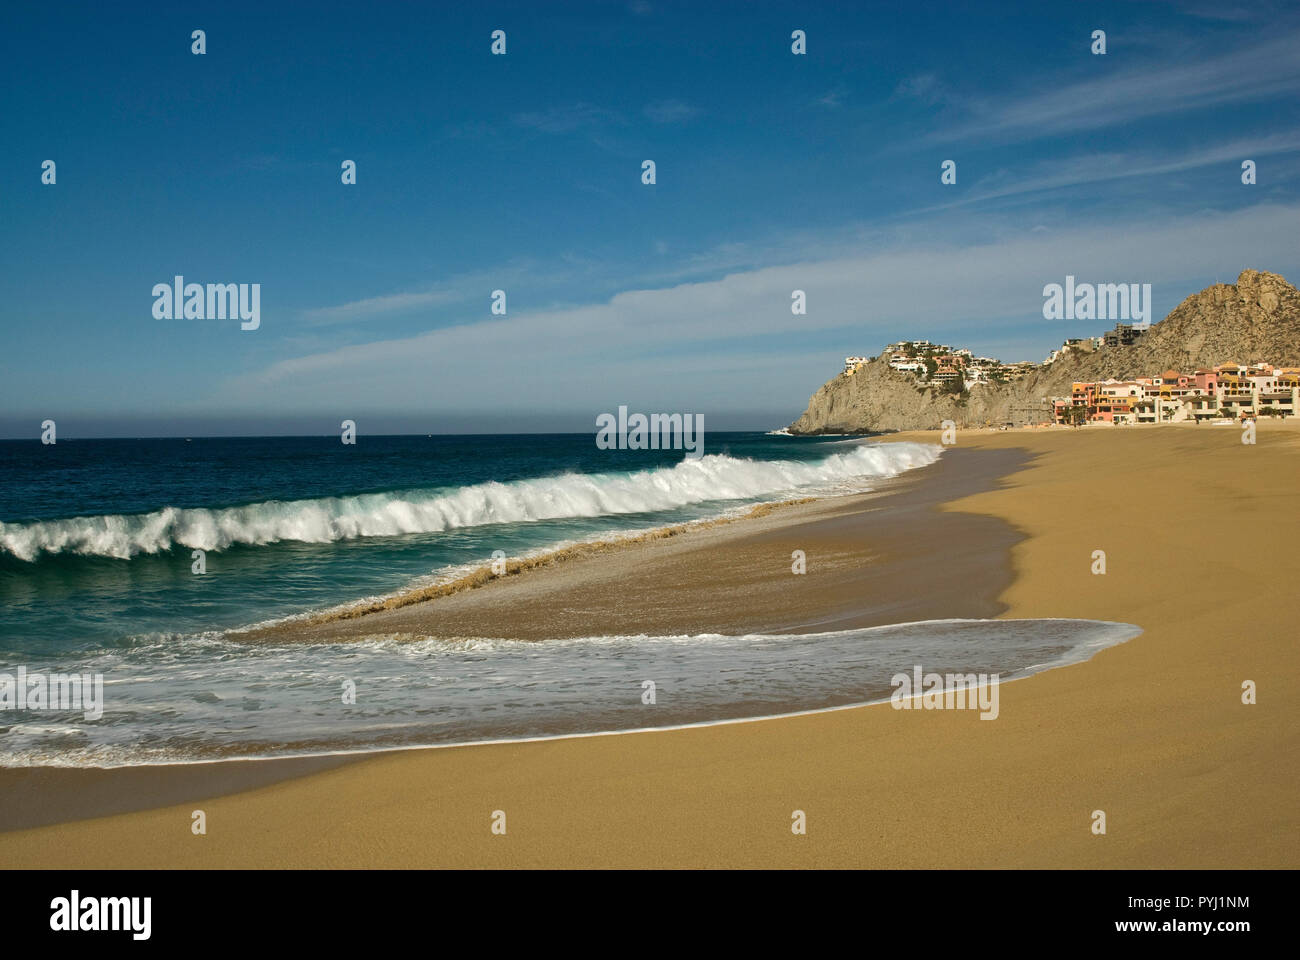 Huge Pacific Ocean waves, hotels in distance at Playa Solmar at Cabo San Lucas, Baja California Sur, Mexico Stock Photo